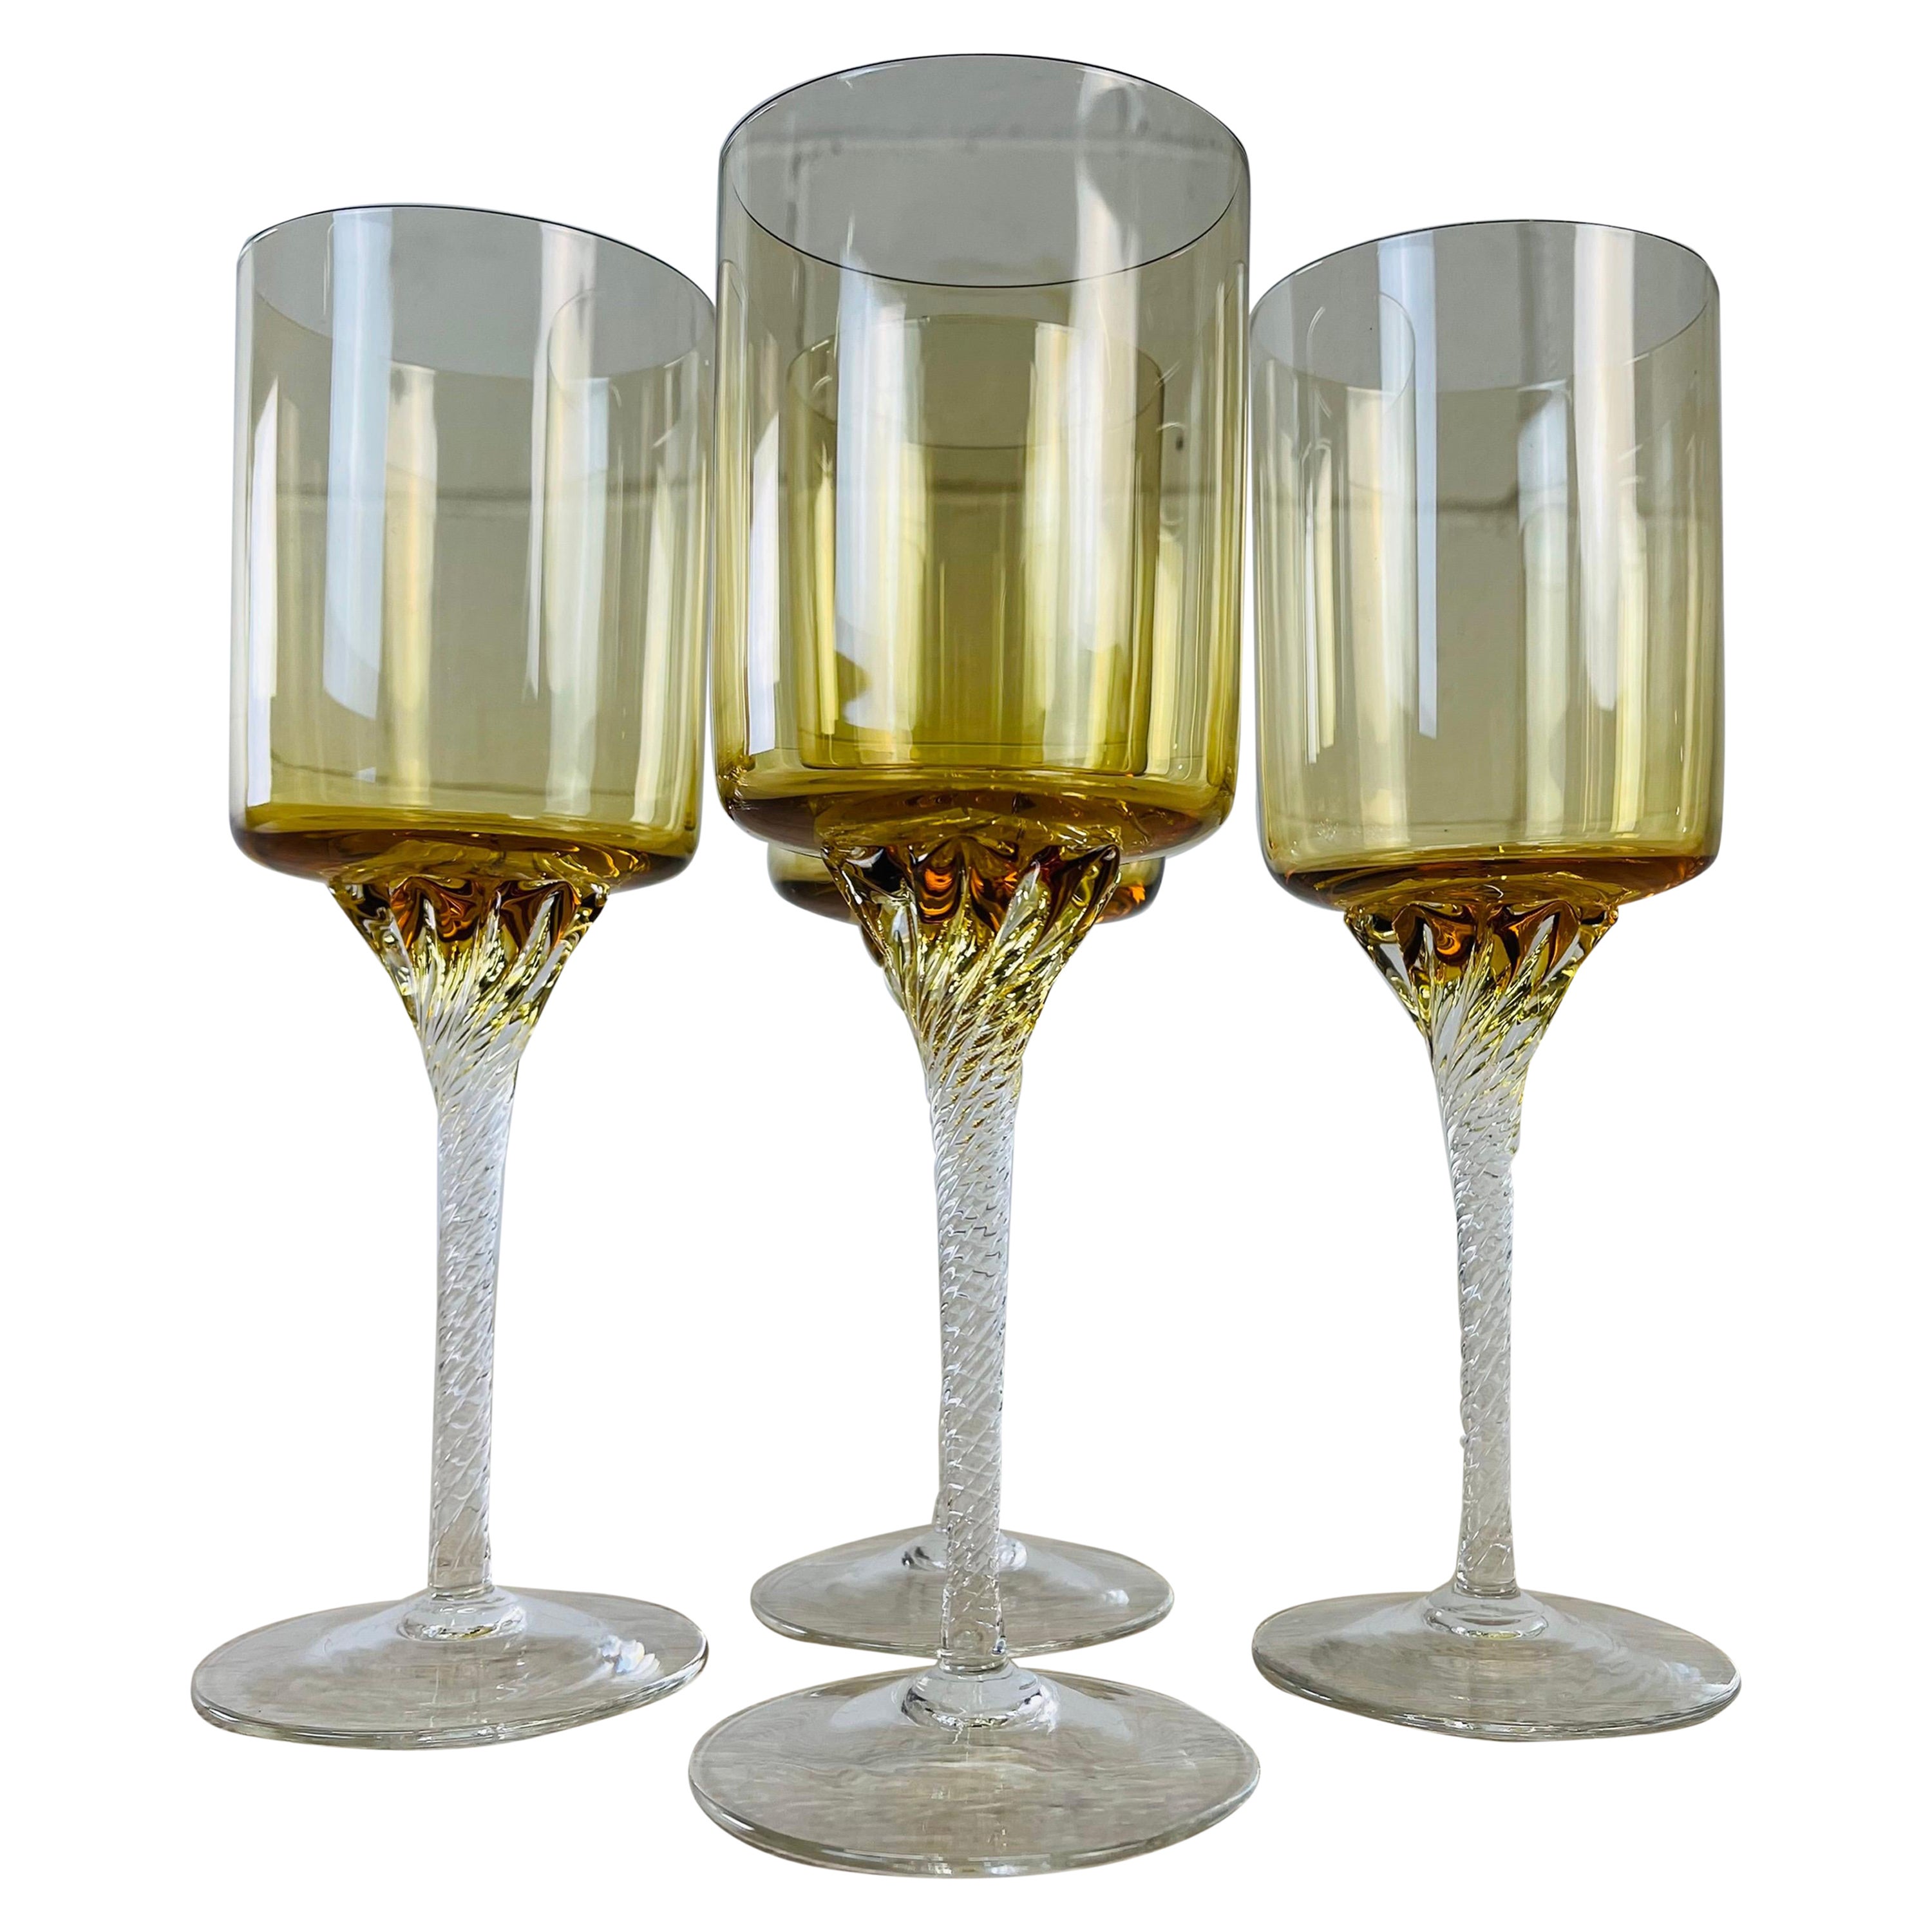 1960s Amber Tall Glass Wine Goblets with Twisted Stems, Set of 4 For Sale